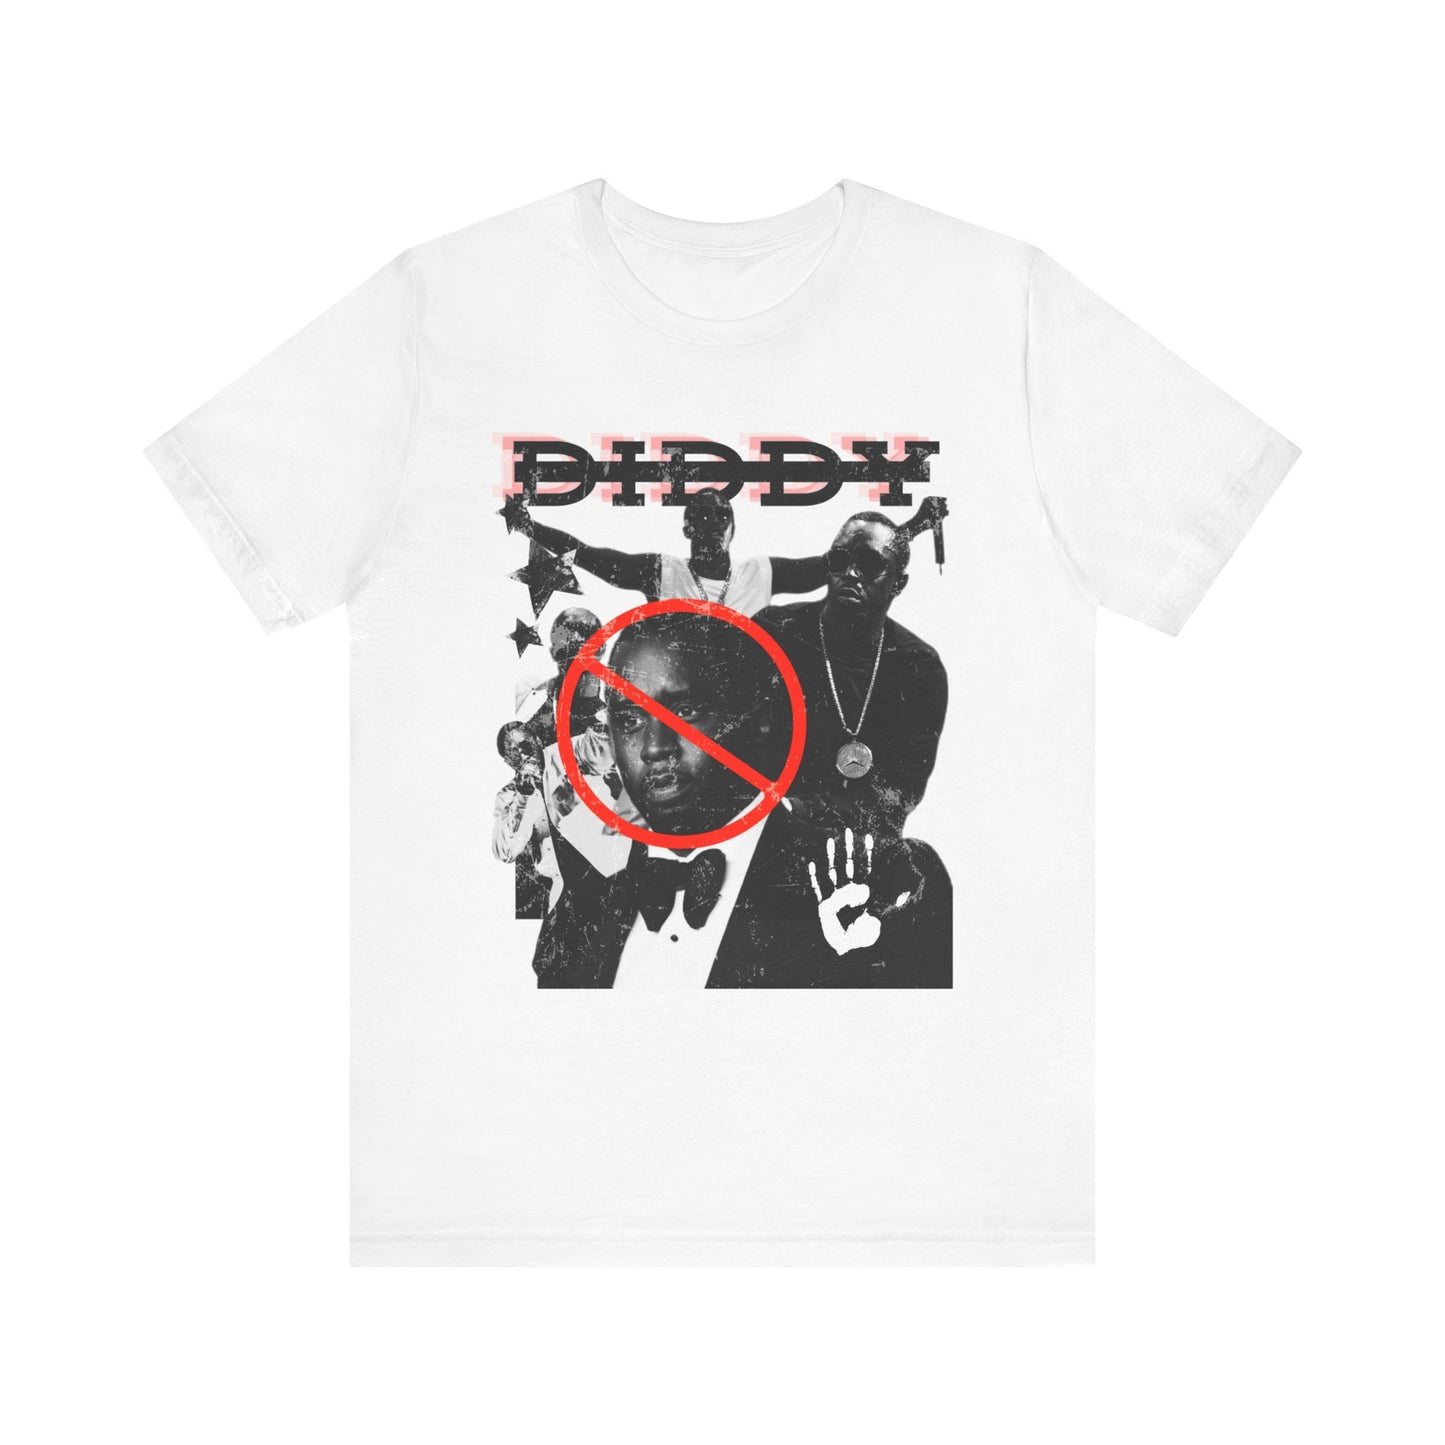 No Diddy Tee